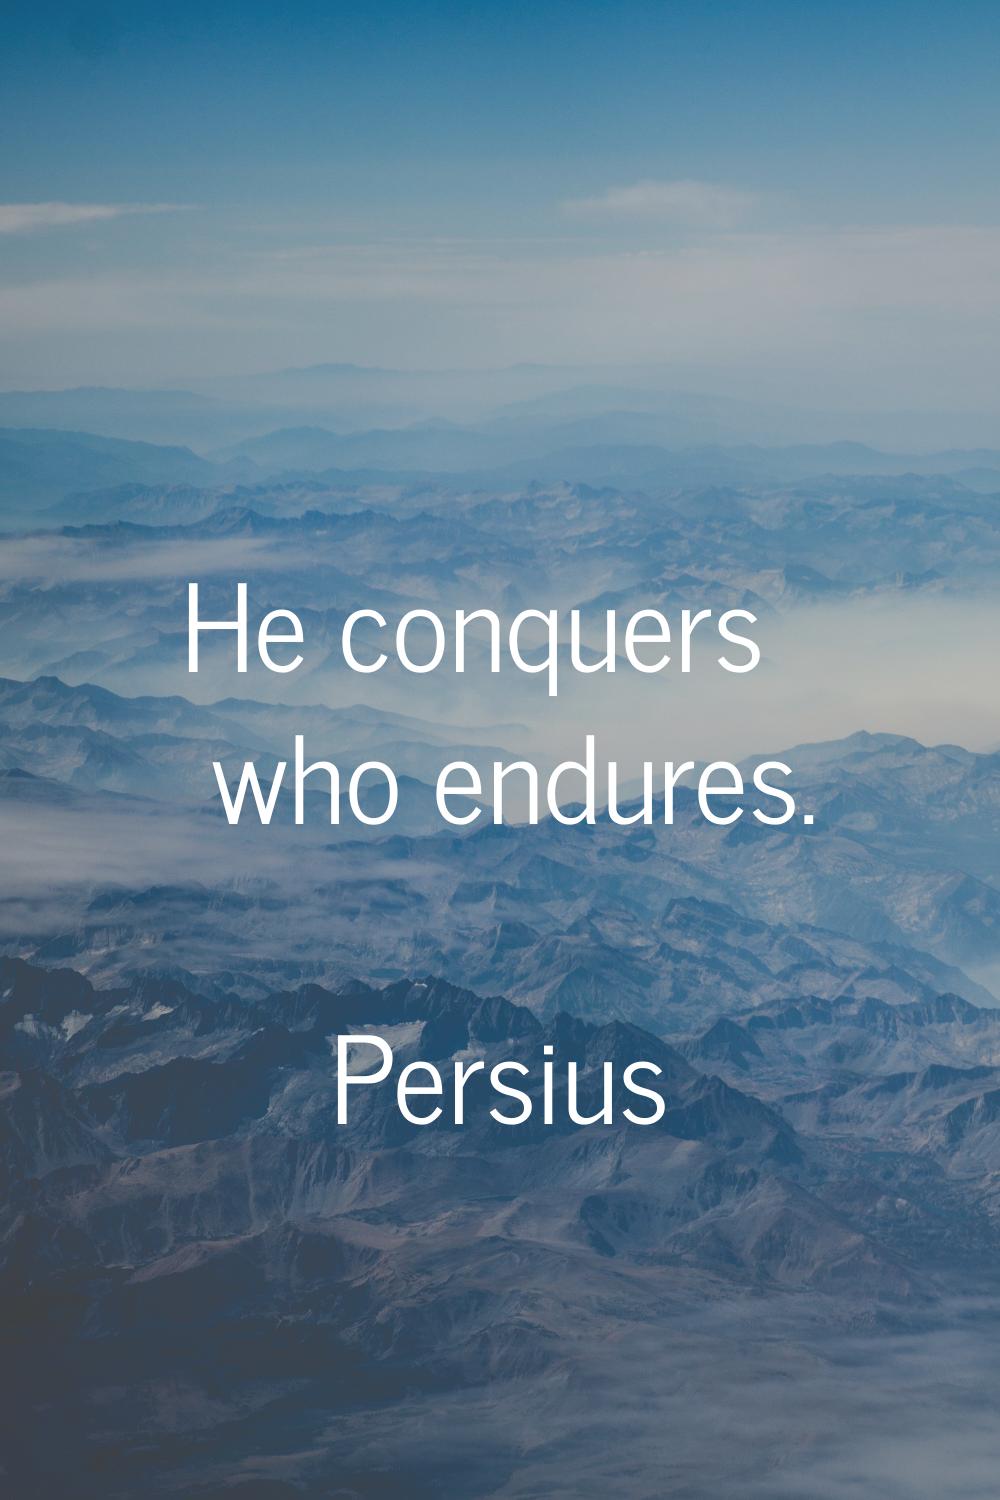 He conquers who endures.